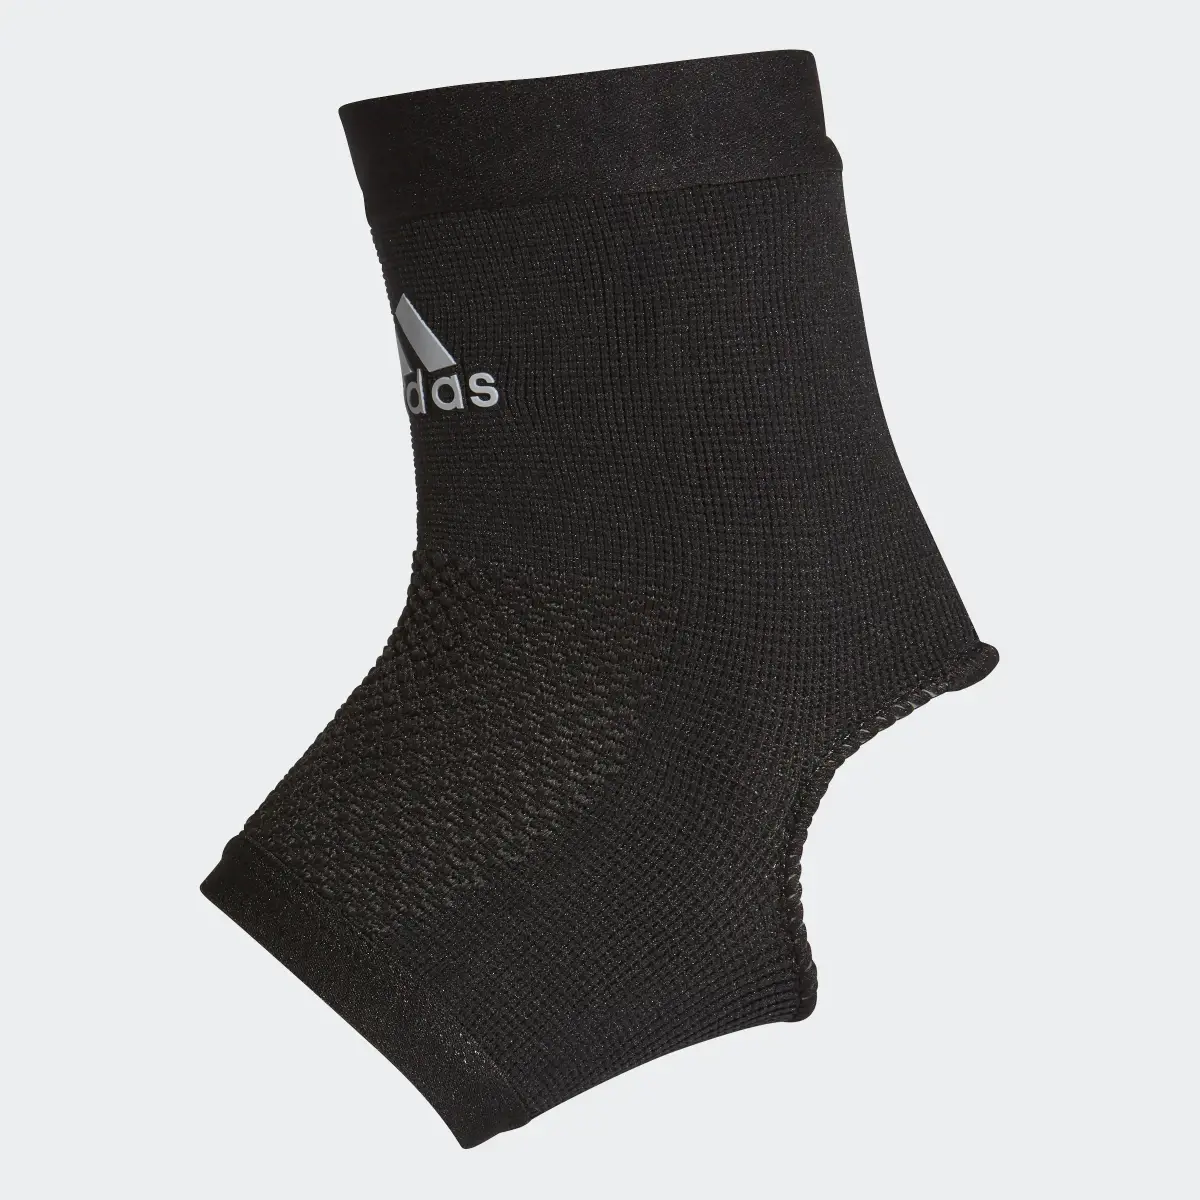 Adidas Performance Ankle Support. 1